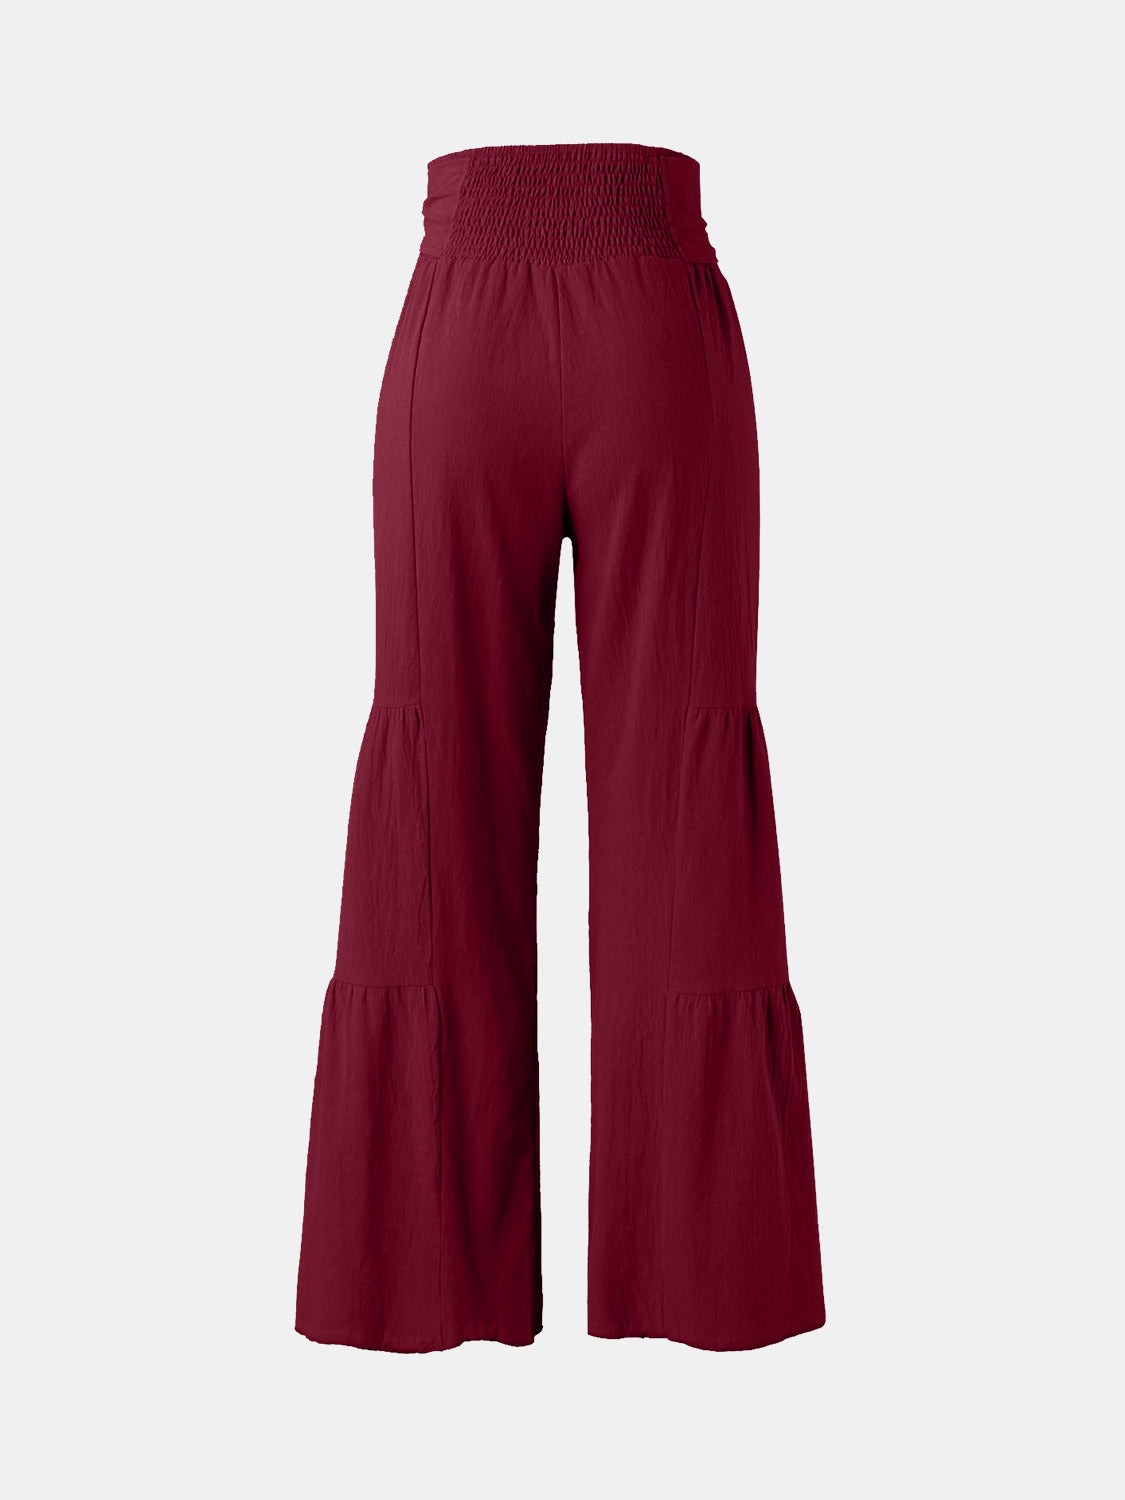 Tied Ruched Wide Leg Pants Burgundy